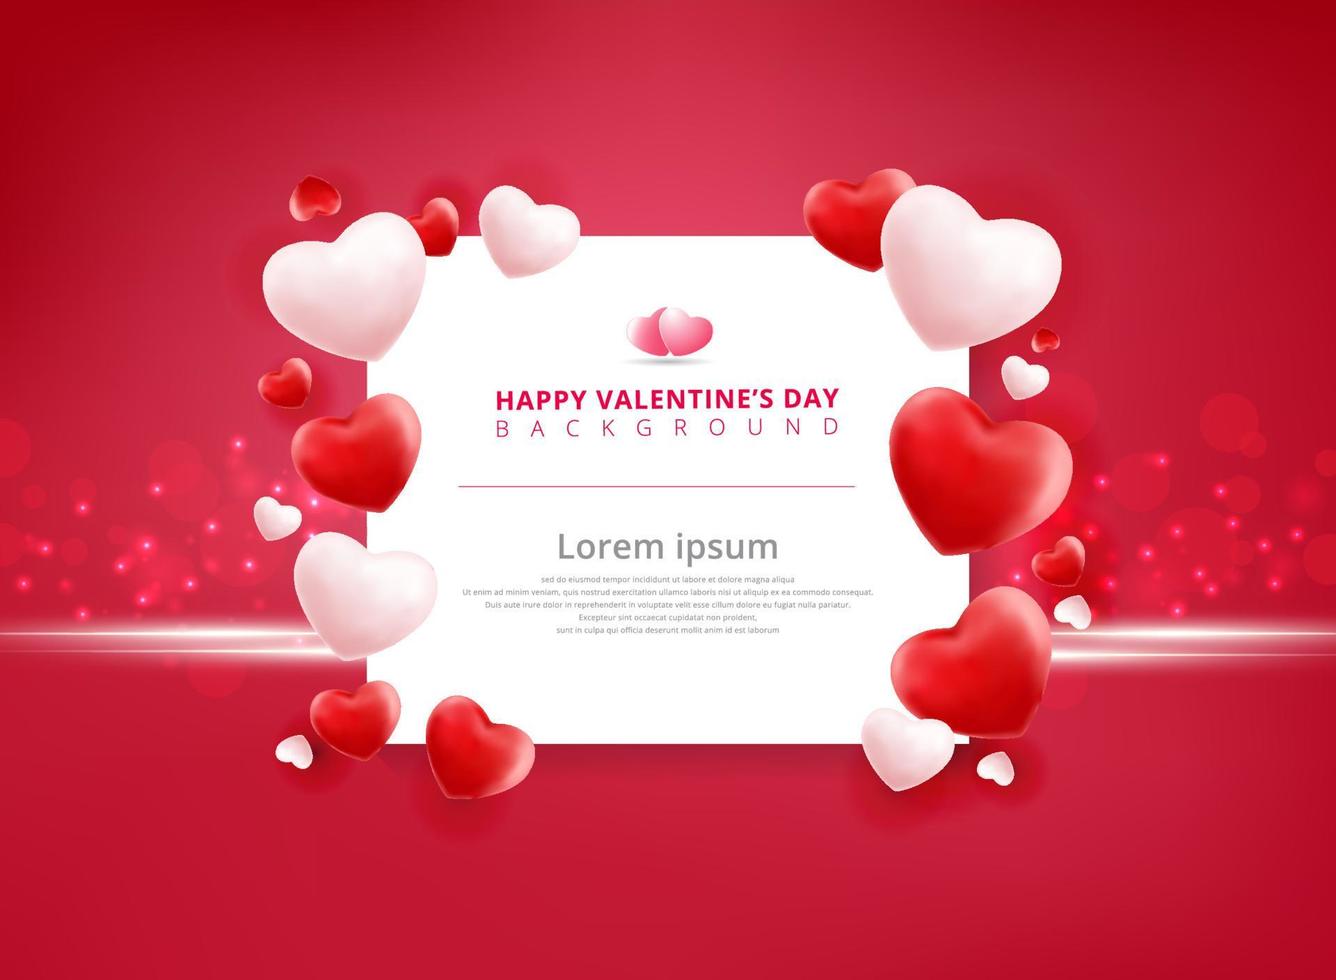 Valentines day sale background with balloons heart pattern. vector